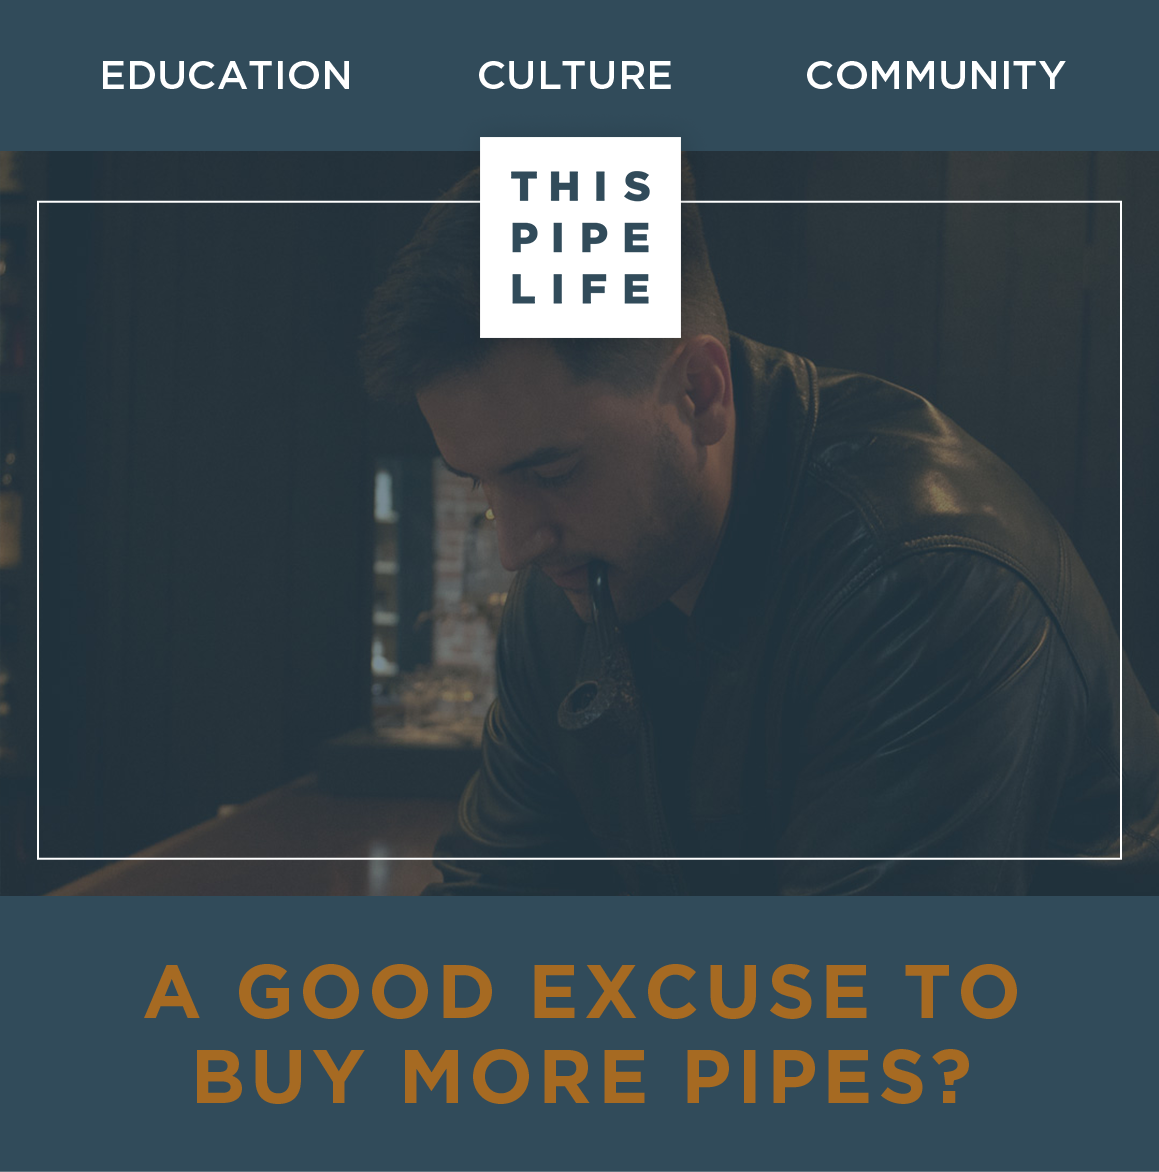 A good excuse to buy more pipes